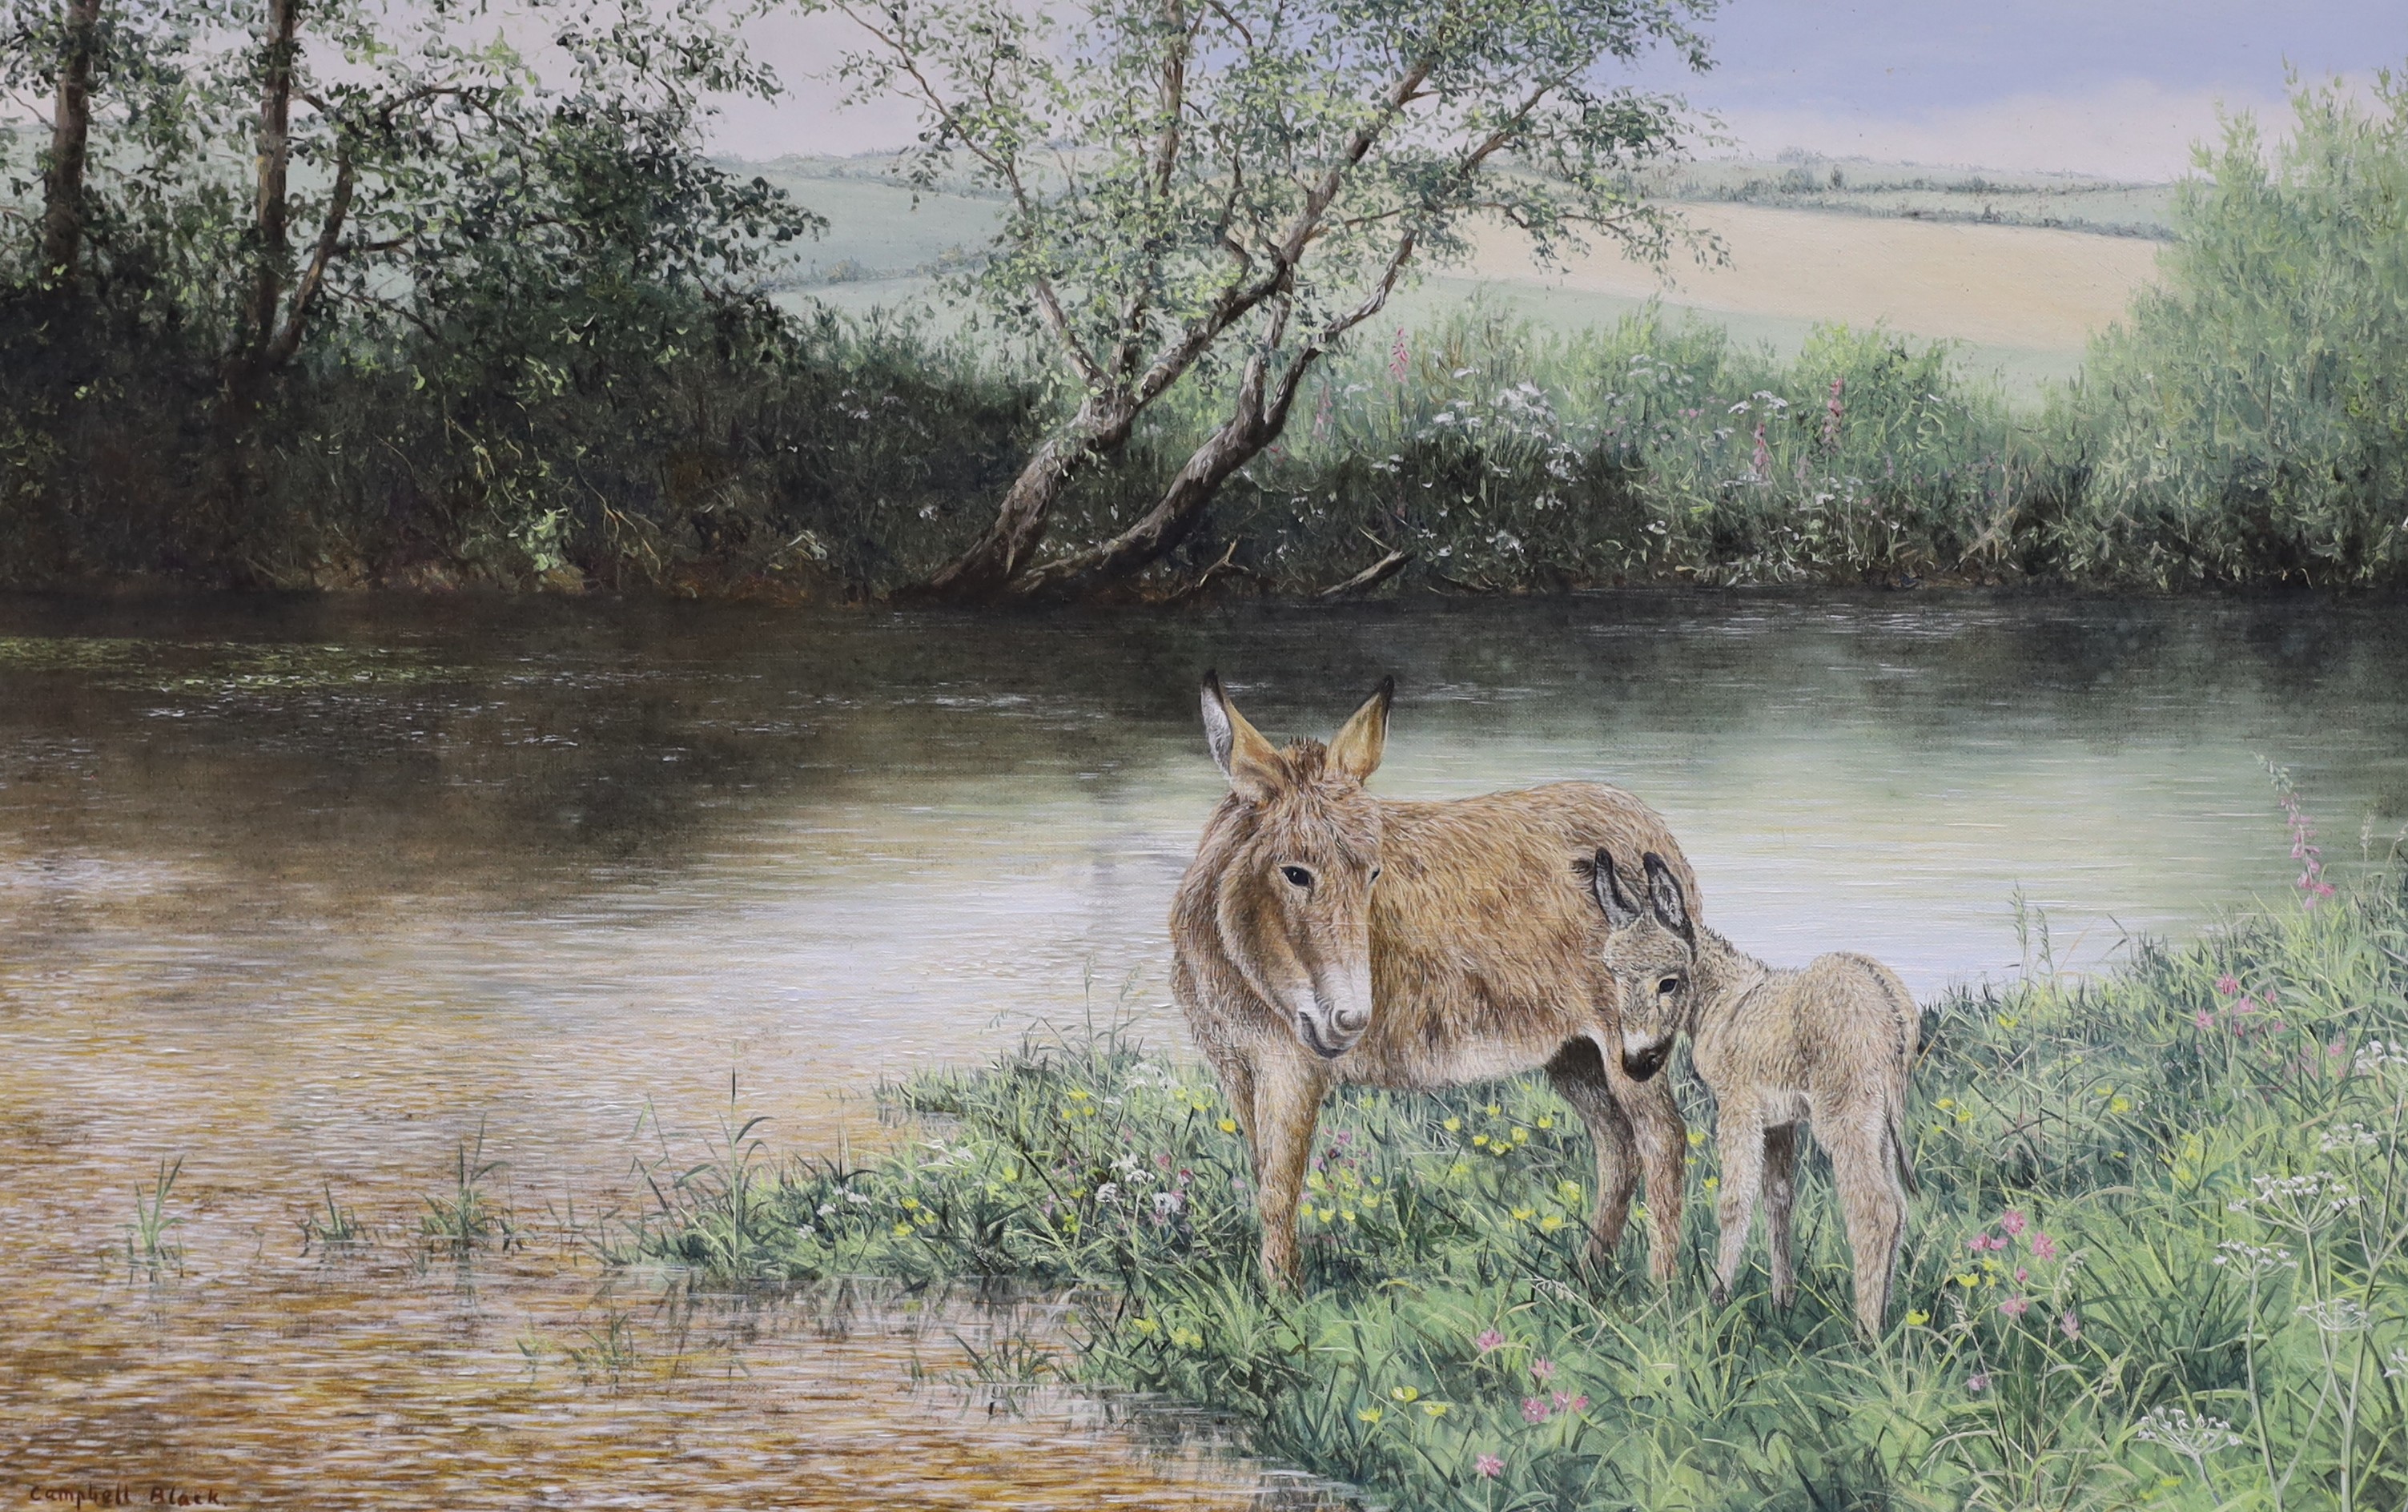 Geoffrey Campbell-Black (b.1925), oil on canvas, Donkey's beside a river, signed, 40 x 62cm